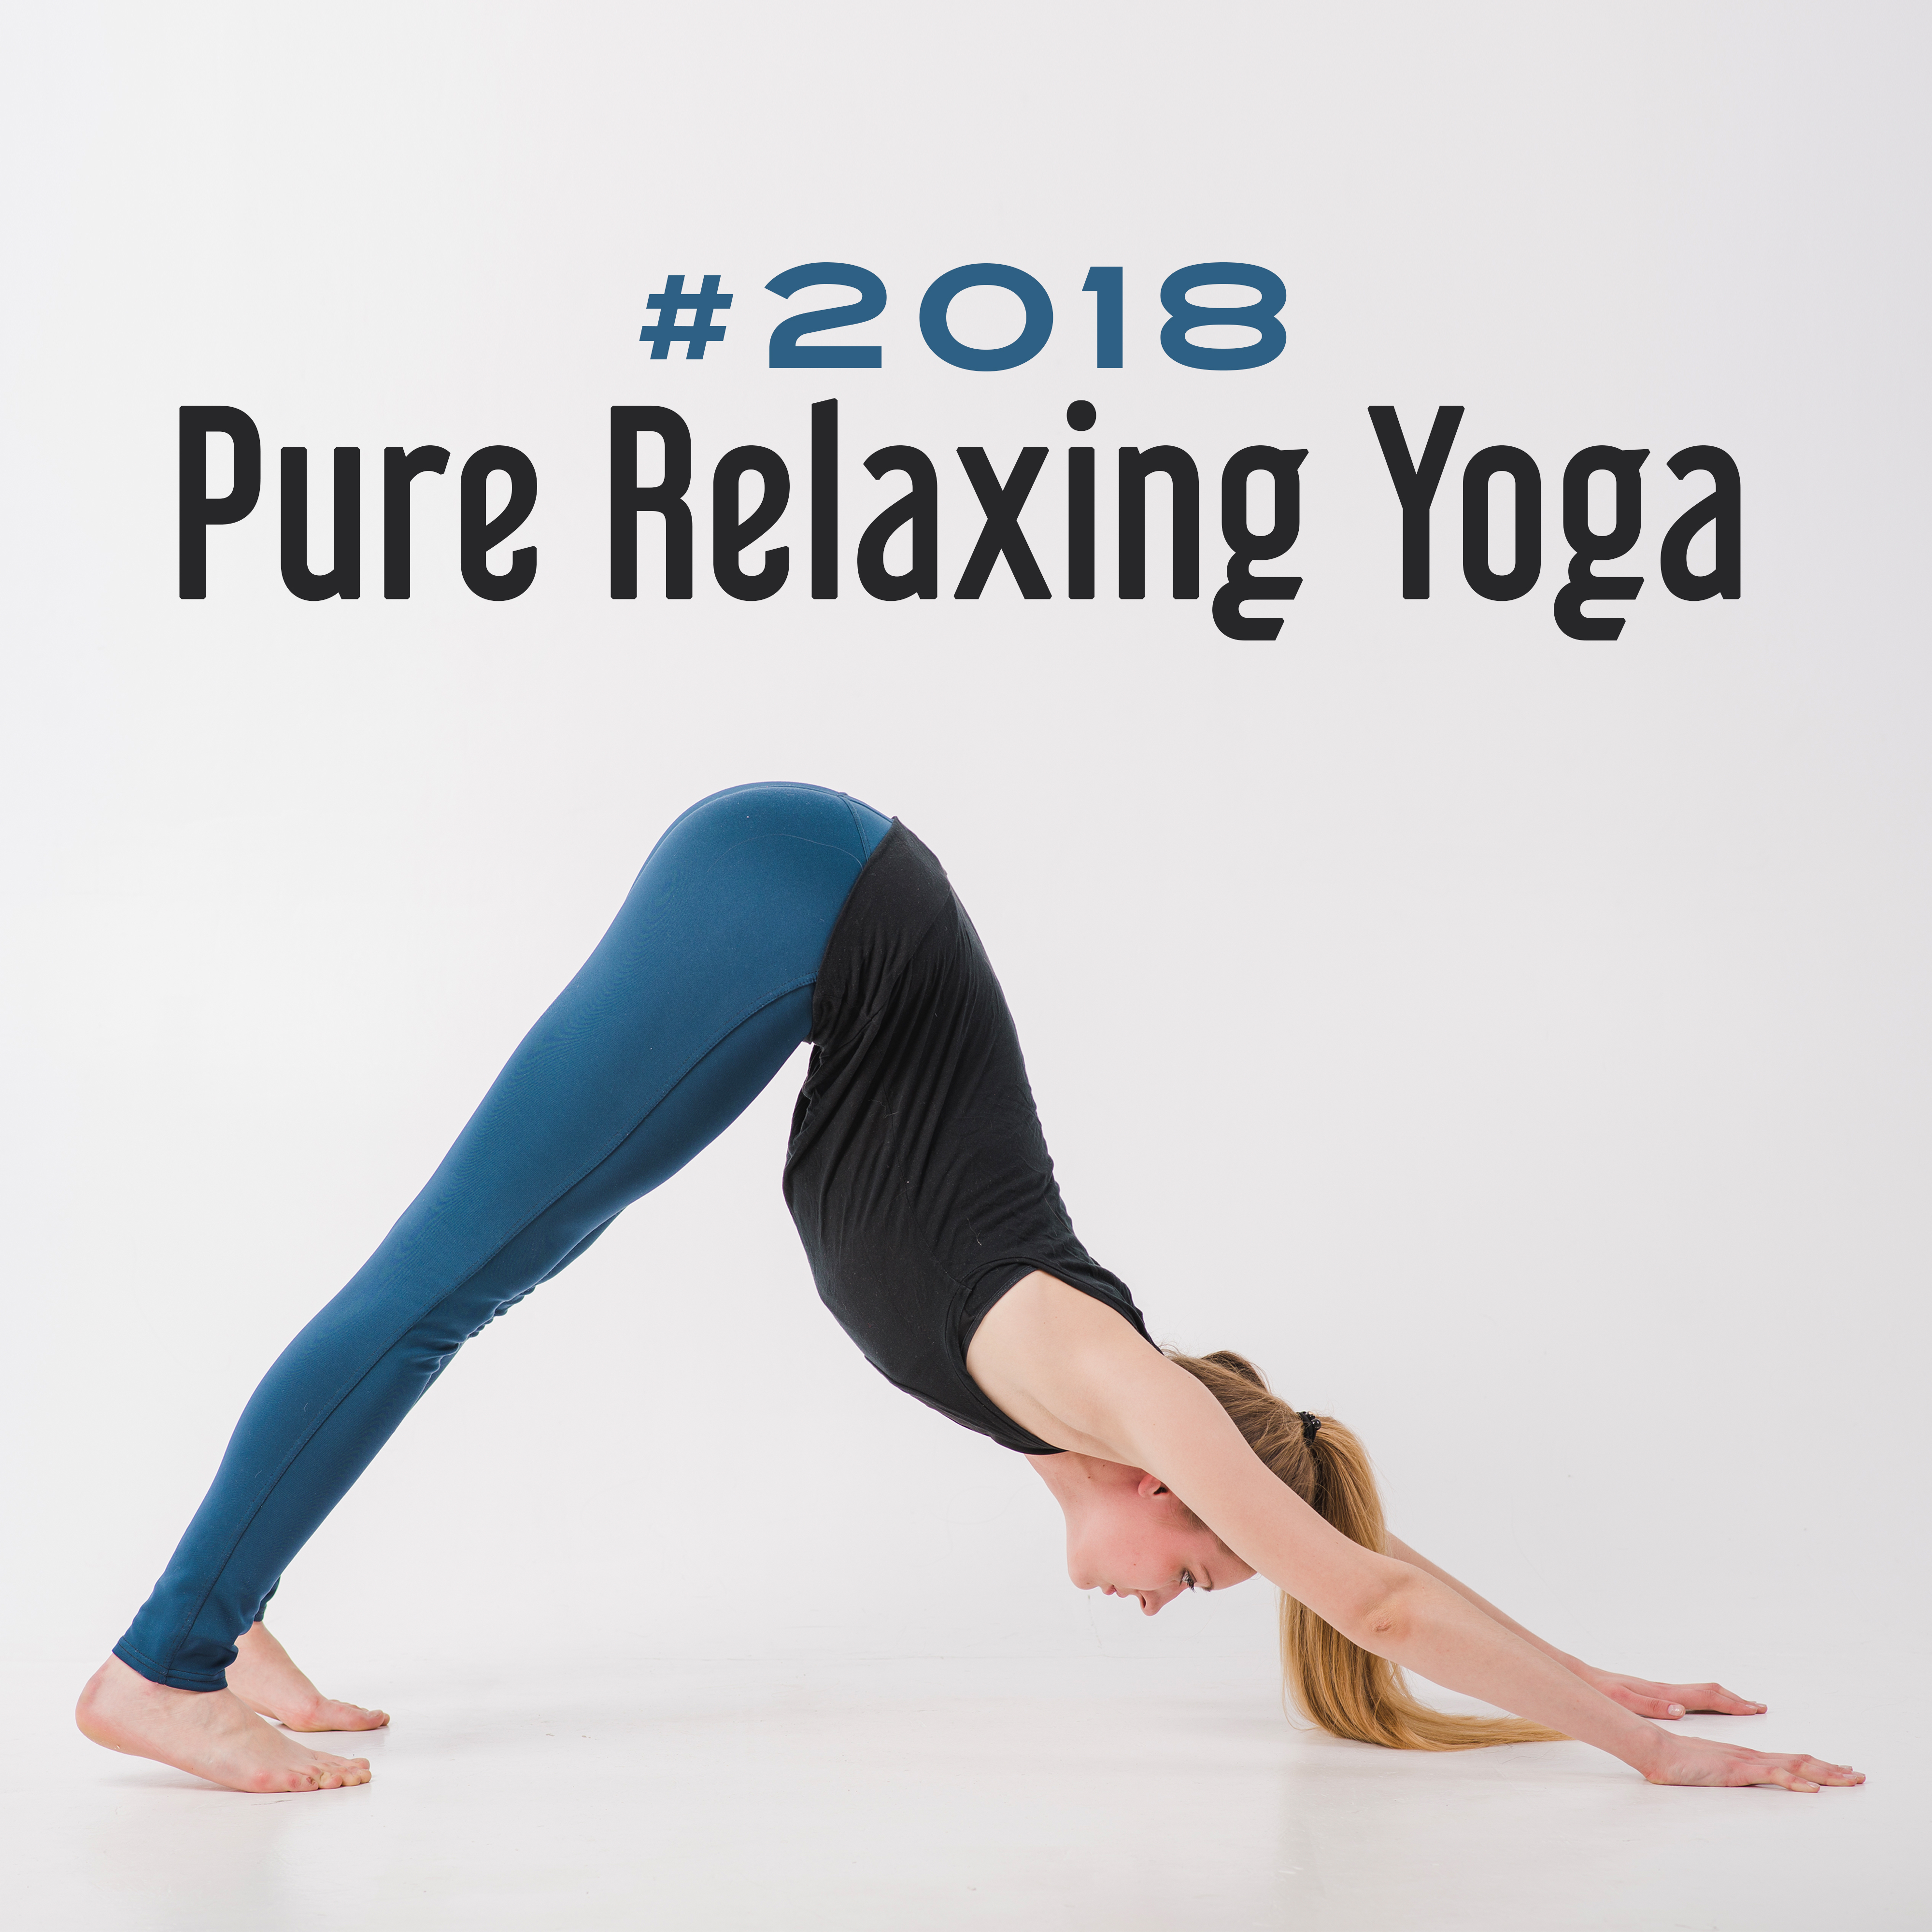 #2018 Pure Relaxing Yoga